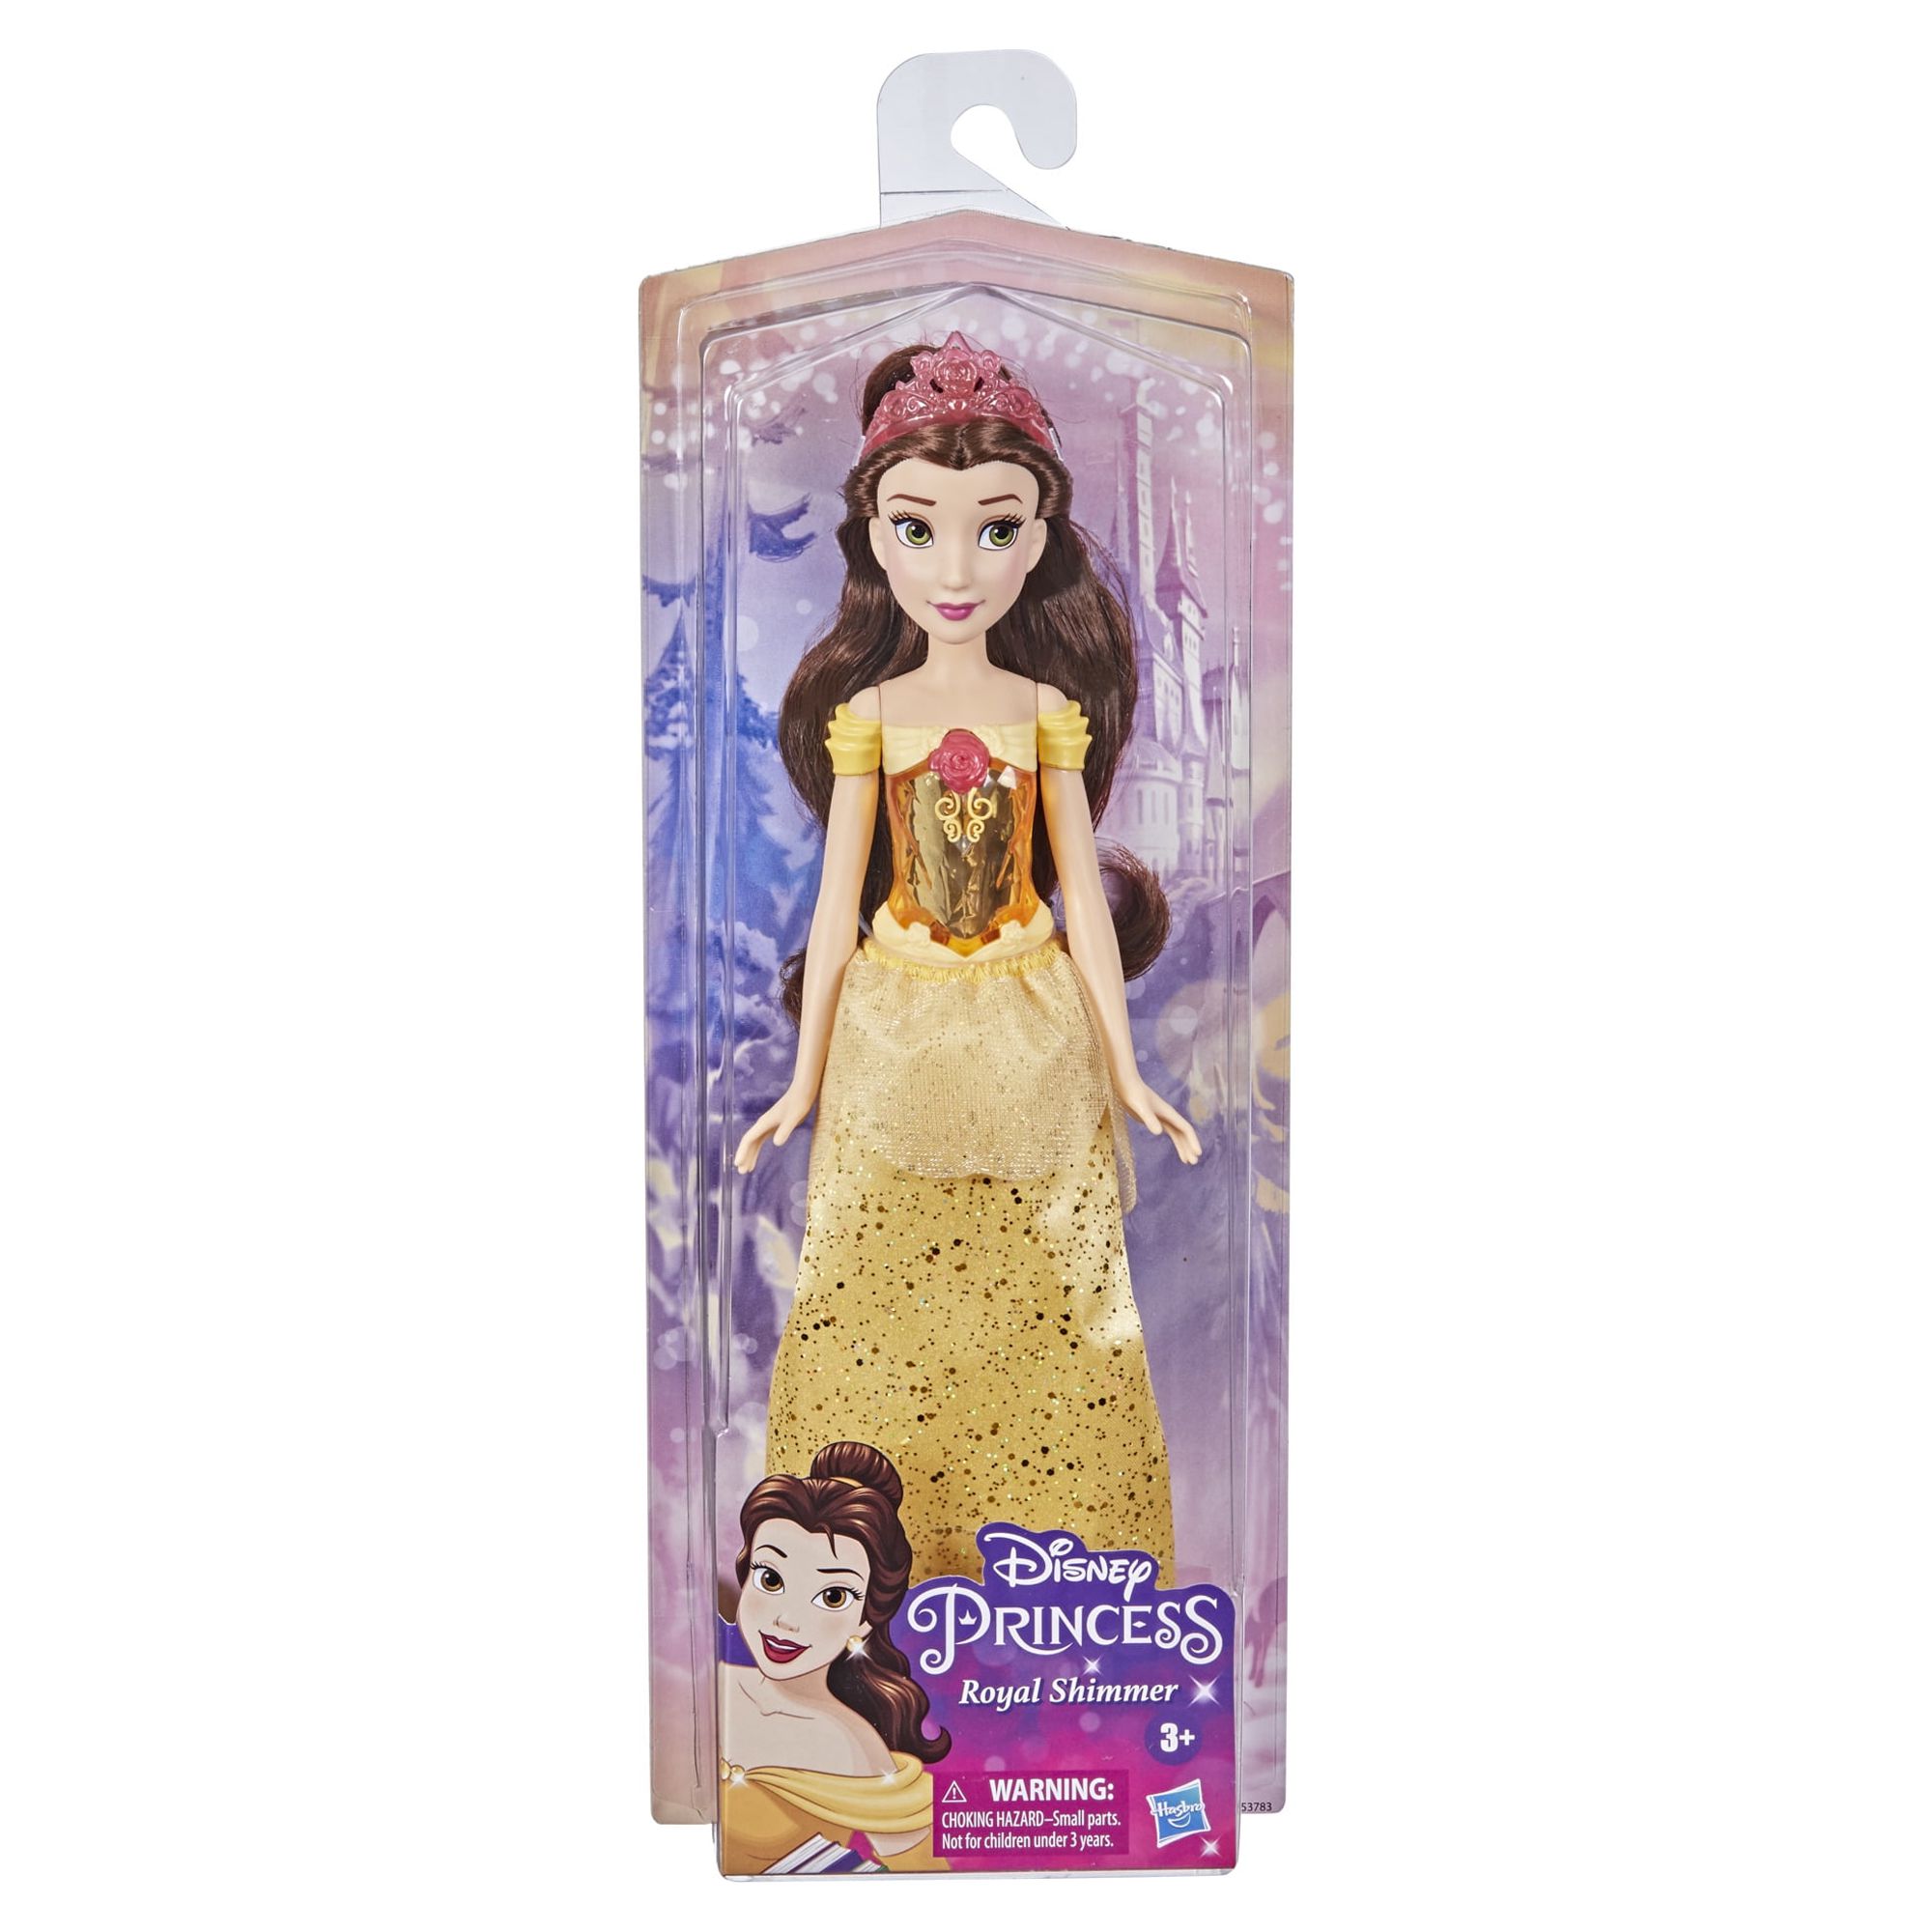 Disney Princess Royal Shimmer Belle Doll, Fashion Doll, Skirt and Accessories - image 3 of 9